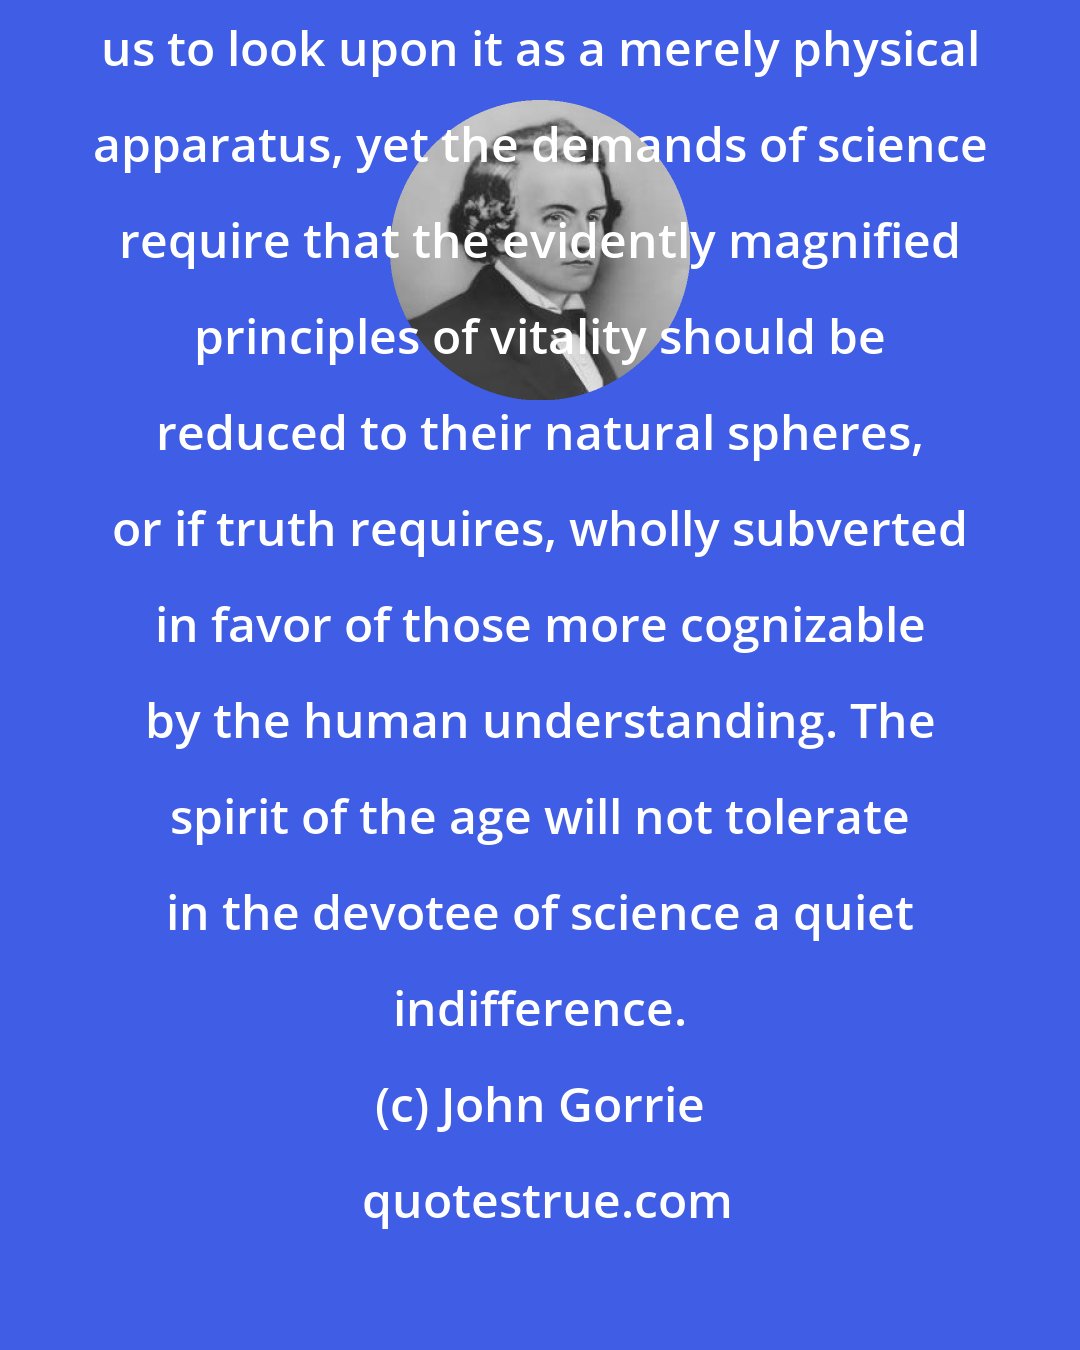 John Gorrie: The wonderful structure of the animal system will probably never permit us to look upon it as a merely physical apparatus, yet the demands of science require that the evidently magnified principles of vitality should be reduced to their natural spheres, or if truth requires, wholly subverted in favor of those more cognizable by the human understanding. The spirit of the age will not tolerate in the devotee of science a quiet indifference.